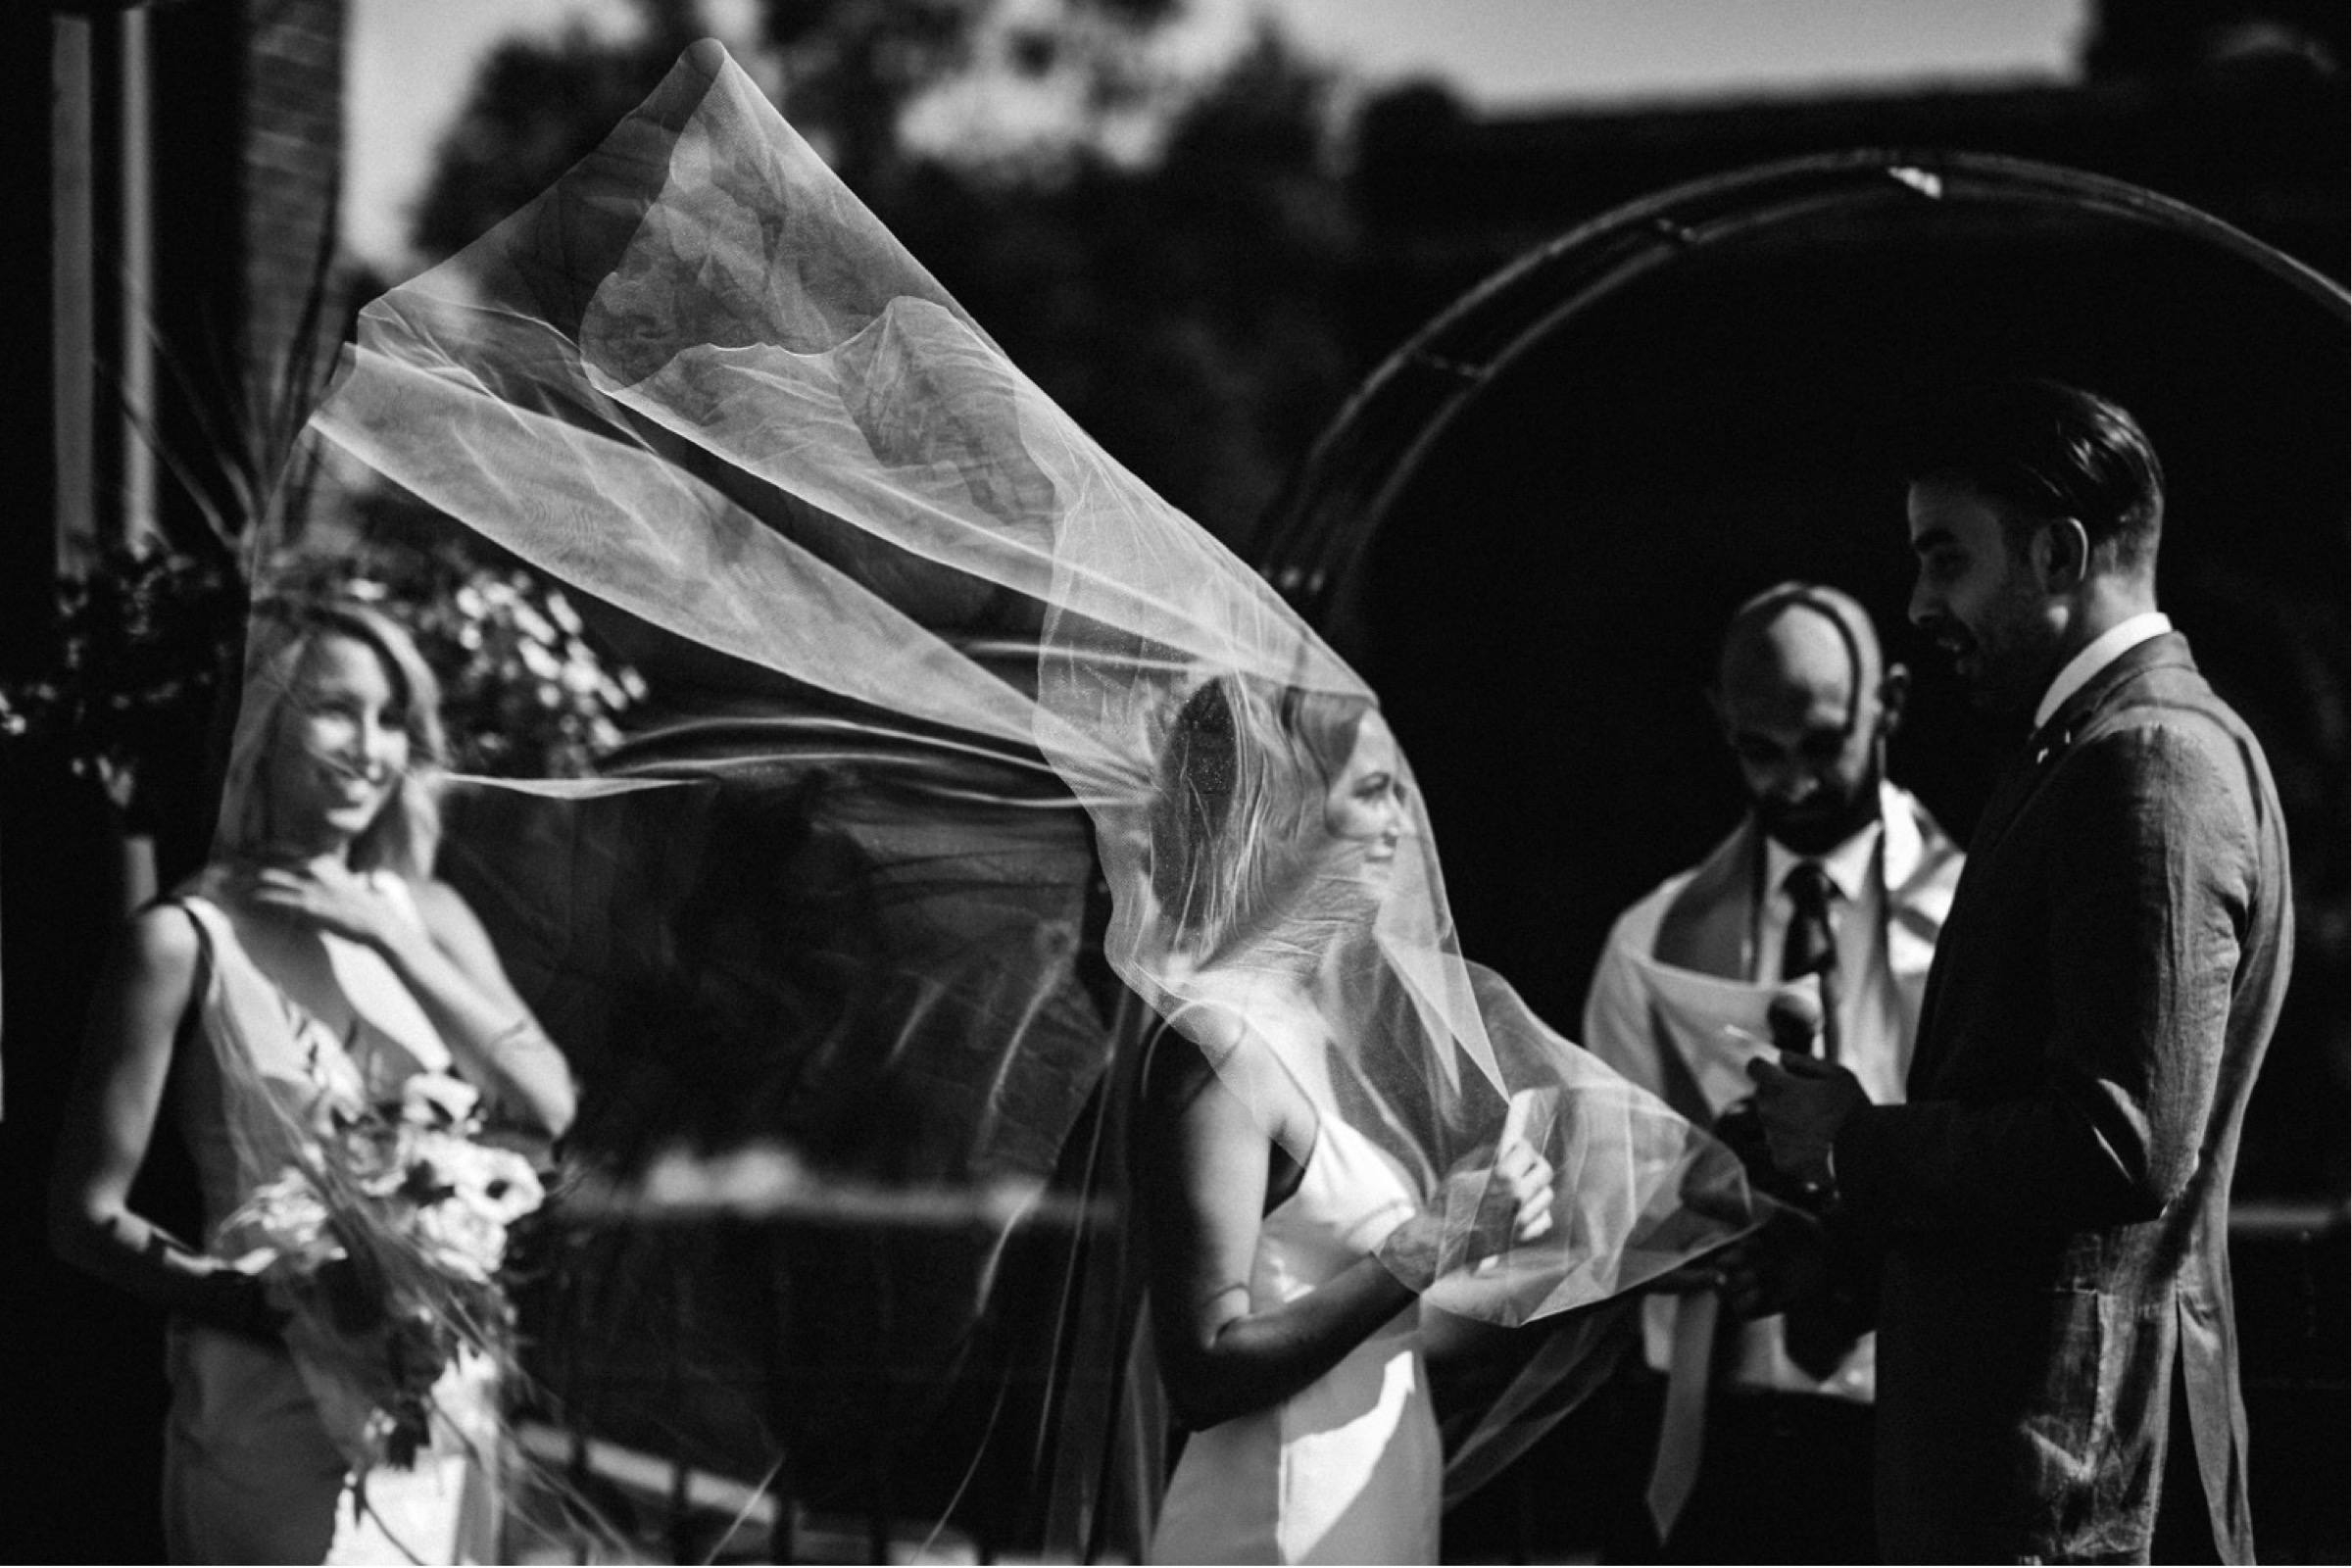 The wind is dramatically blowing a bride's veil behind her during a ceremony portion of a wedding day timeline